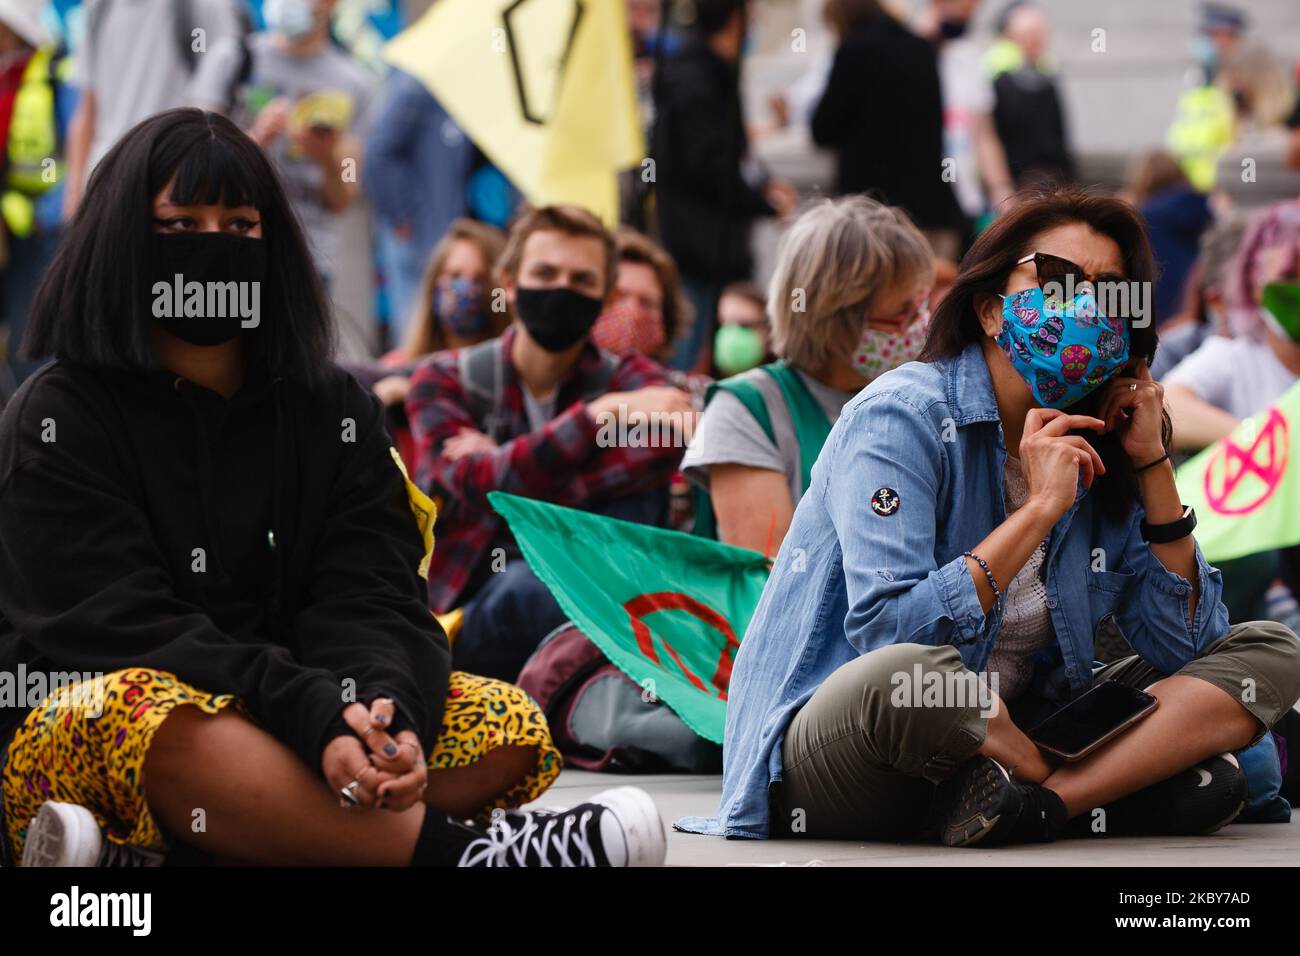 Members of climate change activist movement Extinction Rebellion take part in a 'people's assembly' staged by the group in Trafalgar Square in London, England, on September 5, 2020. The event was later broken up by police under coronavirus powers that limit gatherings to just 30 people, with some activists arrested for refusing to disperse. (Photo by David Cliff/NurPhoto) Stock Photo